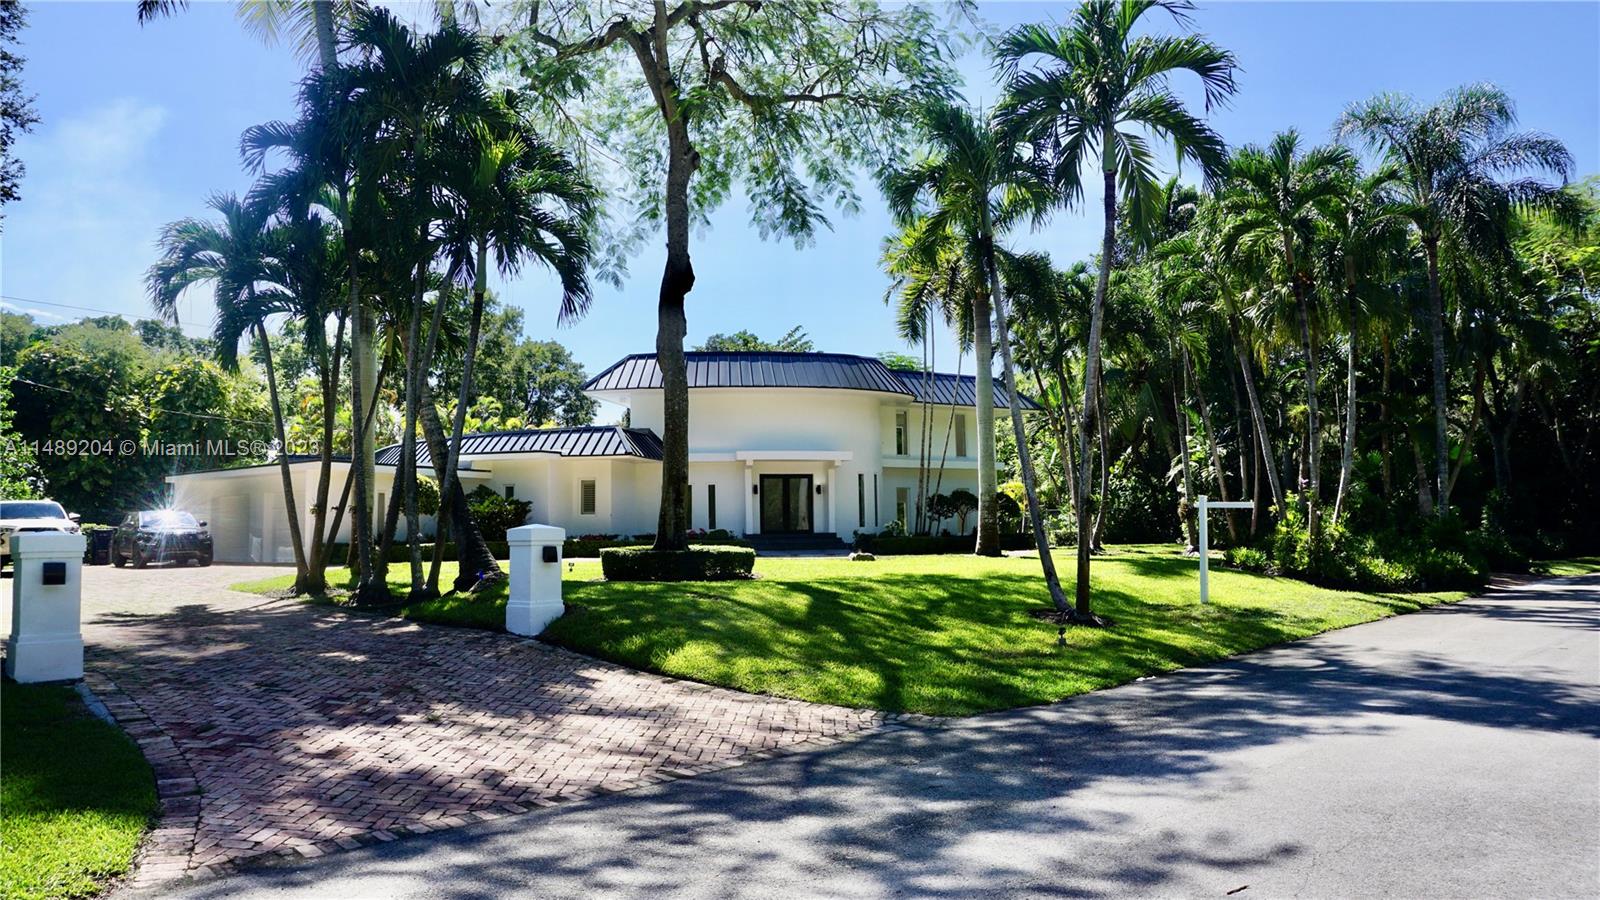 6540 SW 135th Ter 0, Pinecrest, Florida 33156, 6 Bedrooms Bedrooms, ,5 BathroomsBathrooms,Residentiallease,For Rent,6540 SW 135th Ter 0,A11489204